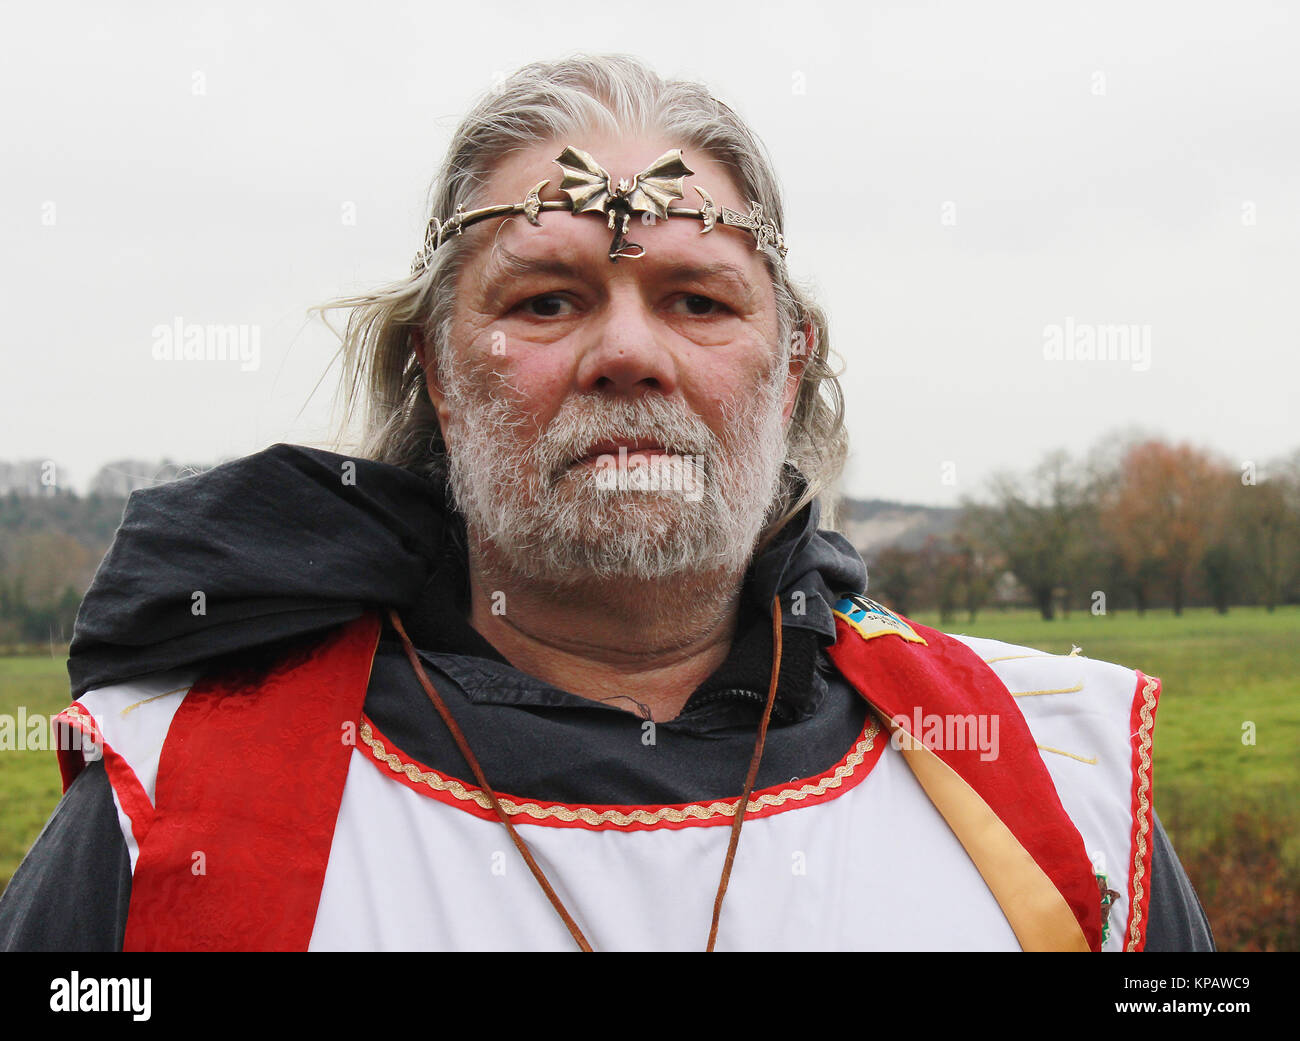 Salisbury, UK. 11th Dec, 2017. Arthur Pendragon (formerly John Rothwell), Druid and self-appointed king, taken in Salisbury, England, 11 December 2017. He is lodged in a continuous dispute with the organisation 'English Heritage'. Visitors aren't usually allowed inside the stone circle - winter solstice is one of the few exceptions. Credit: Charlotte Zink/dpa/Alamy Live News Stock Photo